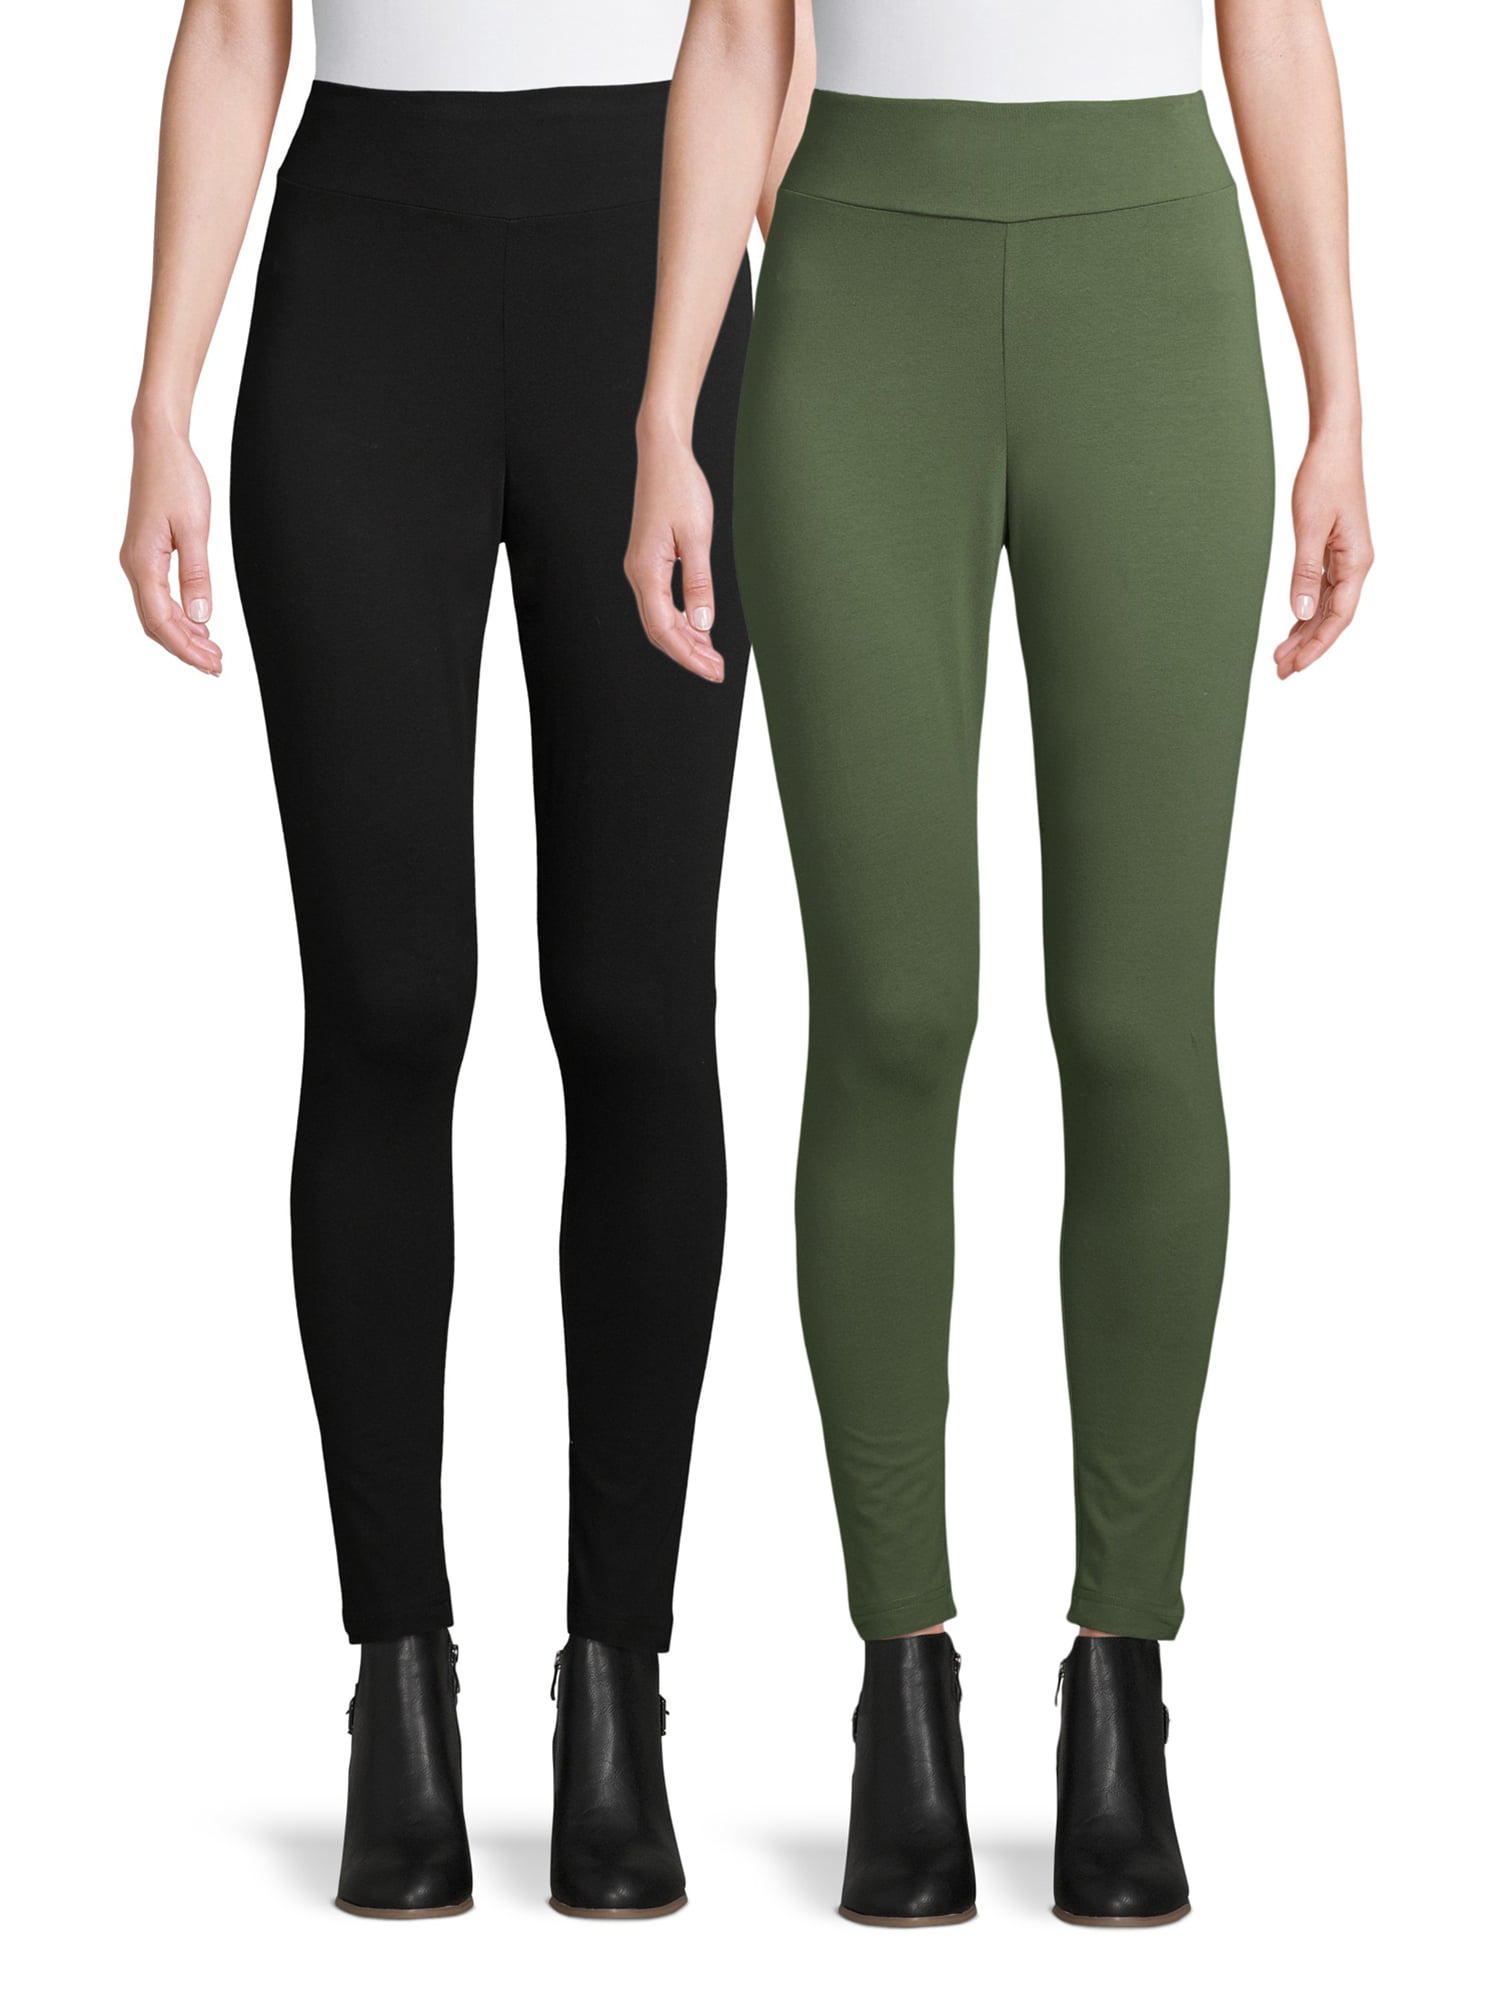 Leggings That Don't Fall Down Detector  International Society of Precision  Agriculture